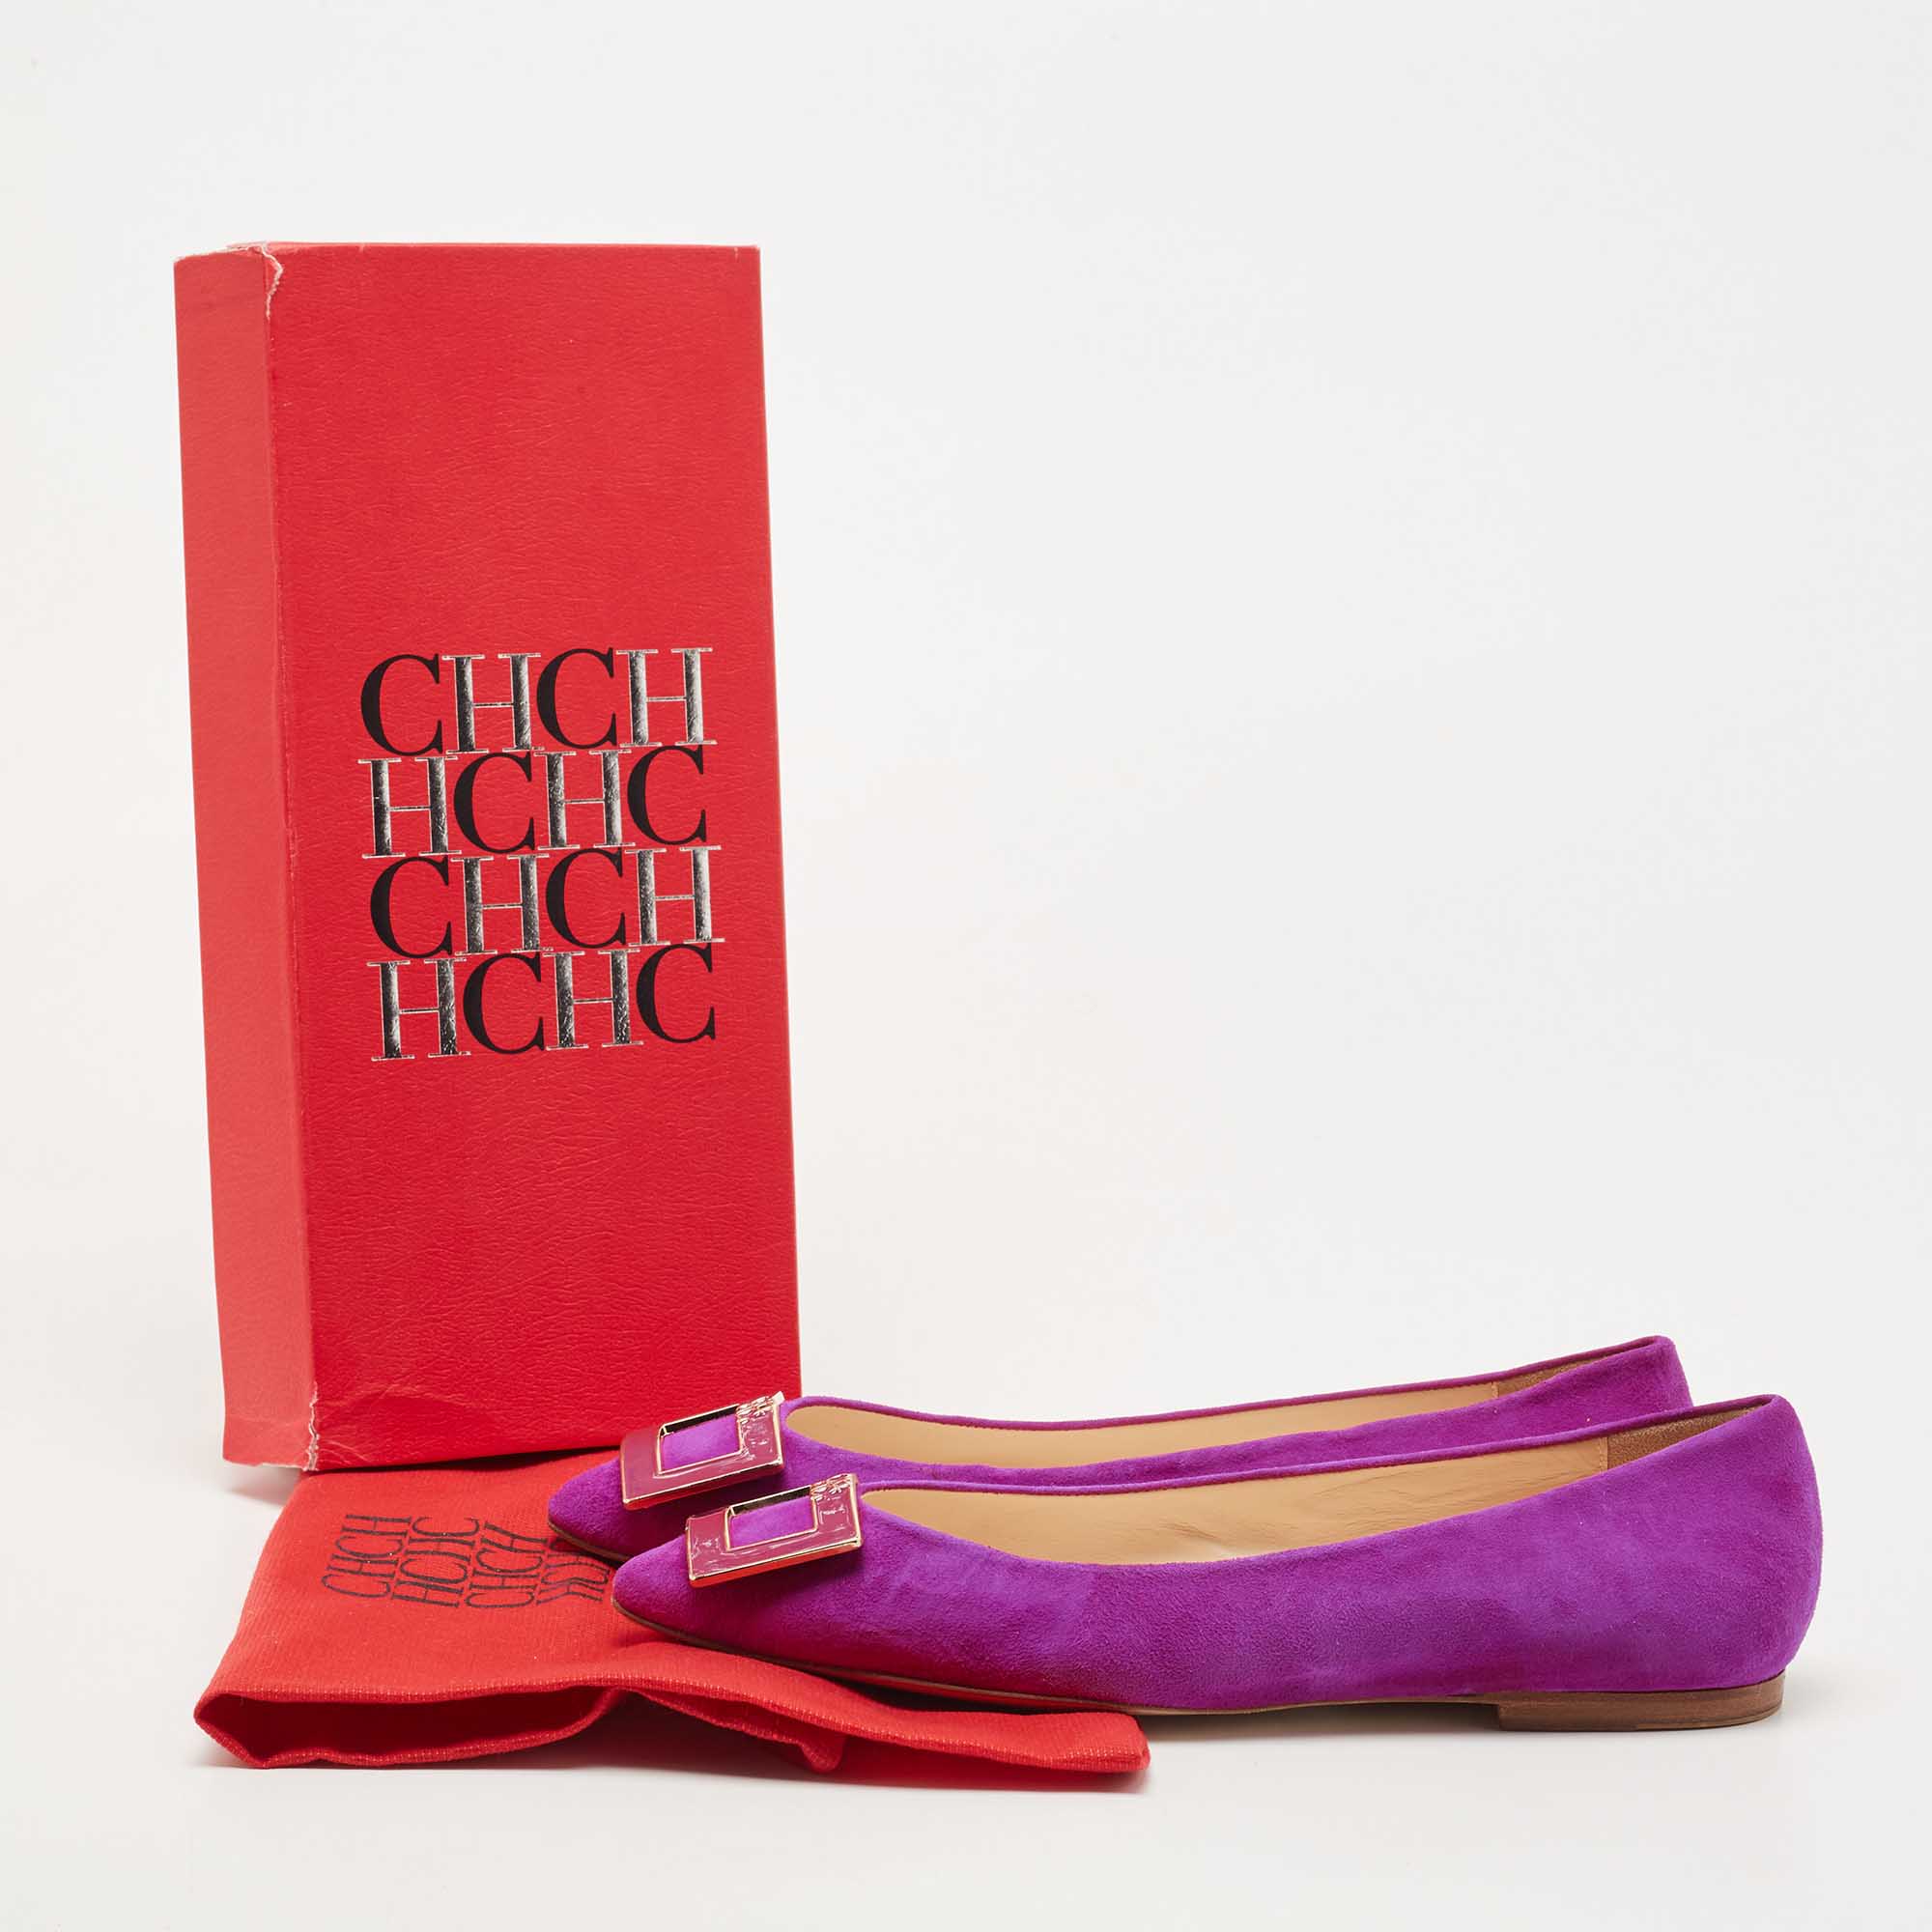 CH Carolina Herrera Pink Suede Pointed Toe Ballet Flats Size 40